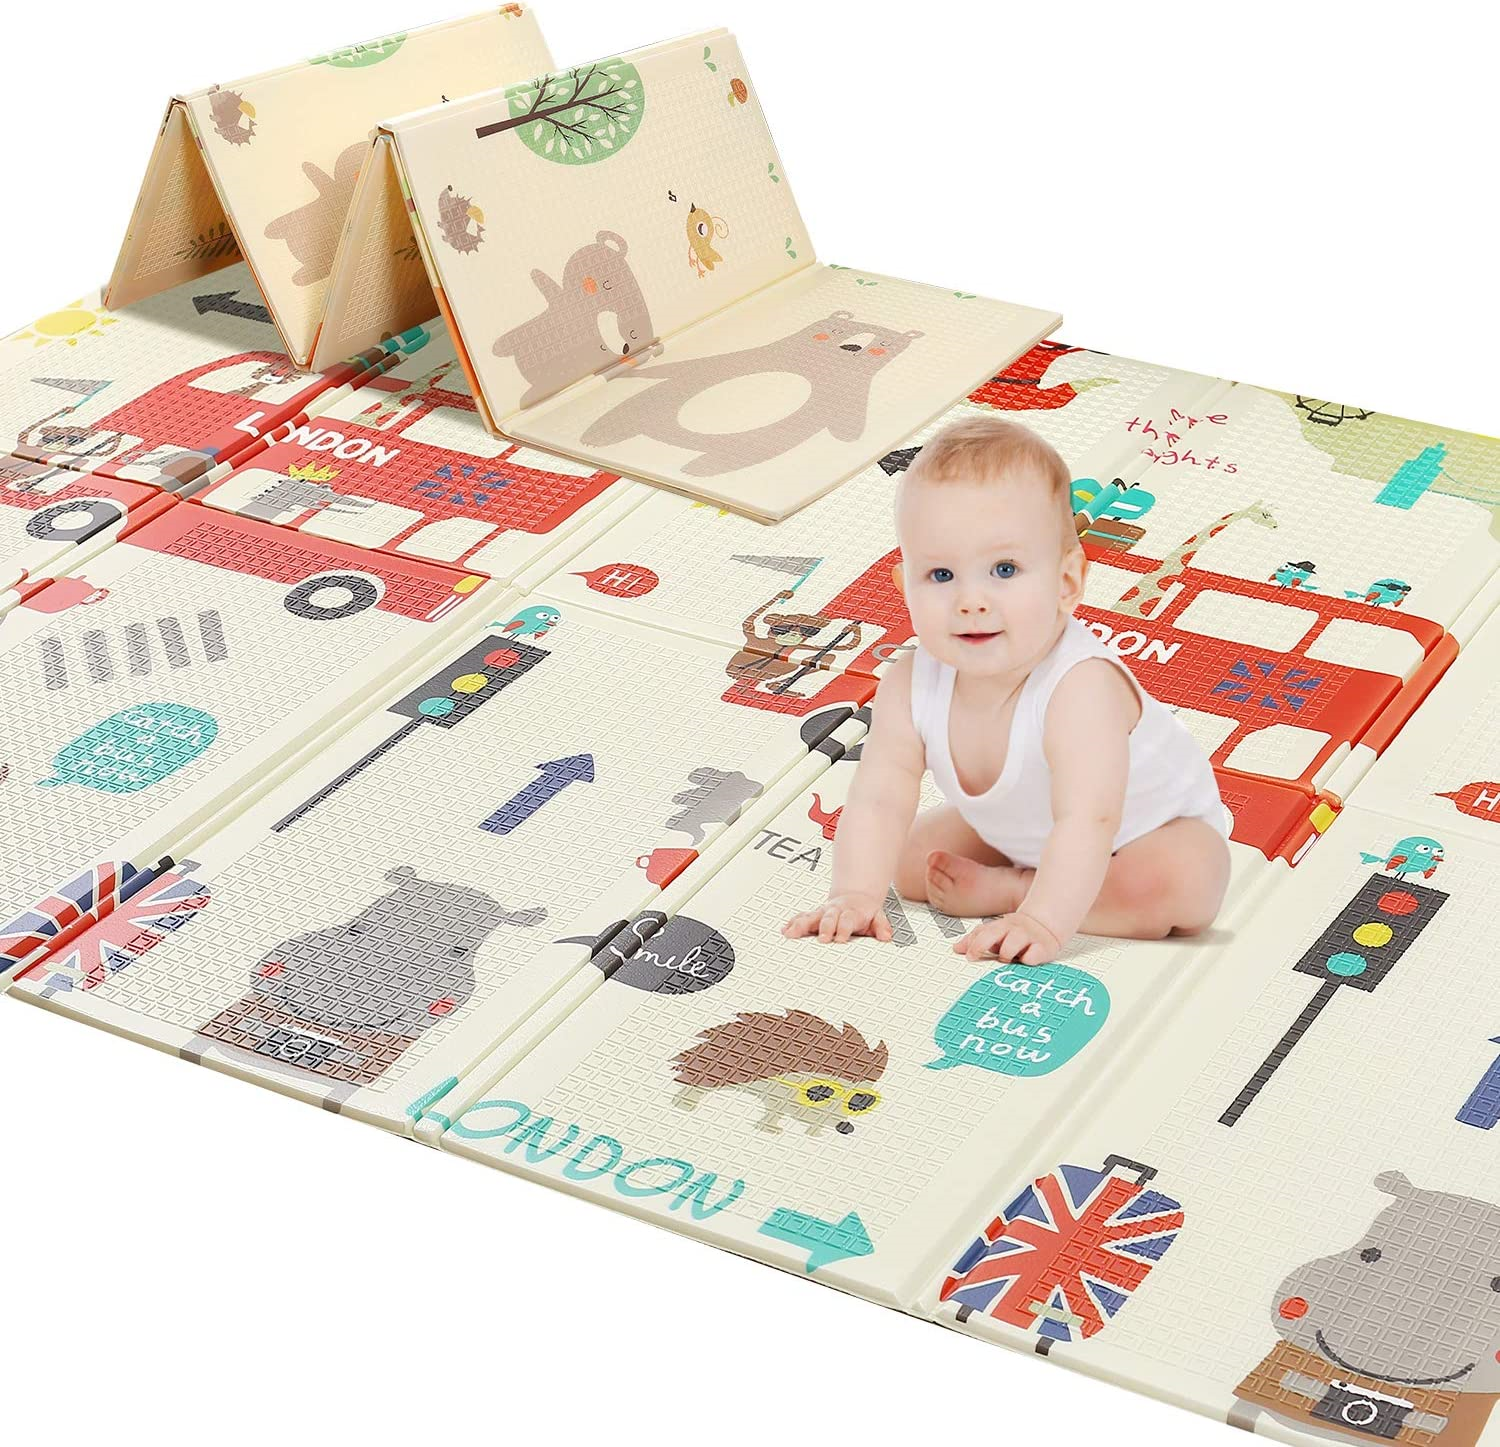 Foldable Baby Play Mat,Reversible, Waterproof, Anti-Slip Floor Playing Mats  for Infants, Babies, Toddlers Indoor/Outdoor (Cute Bear Tall Foot+Animal